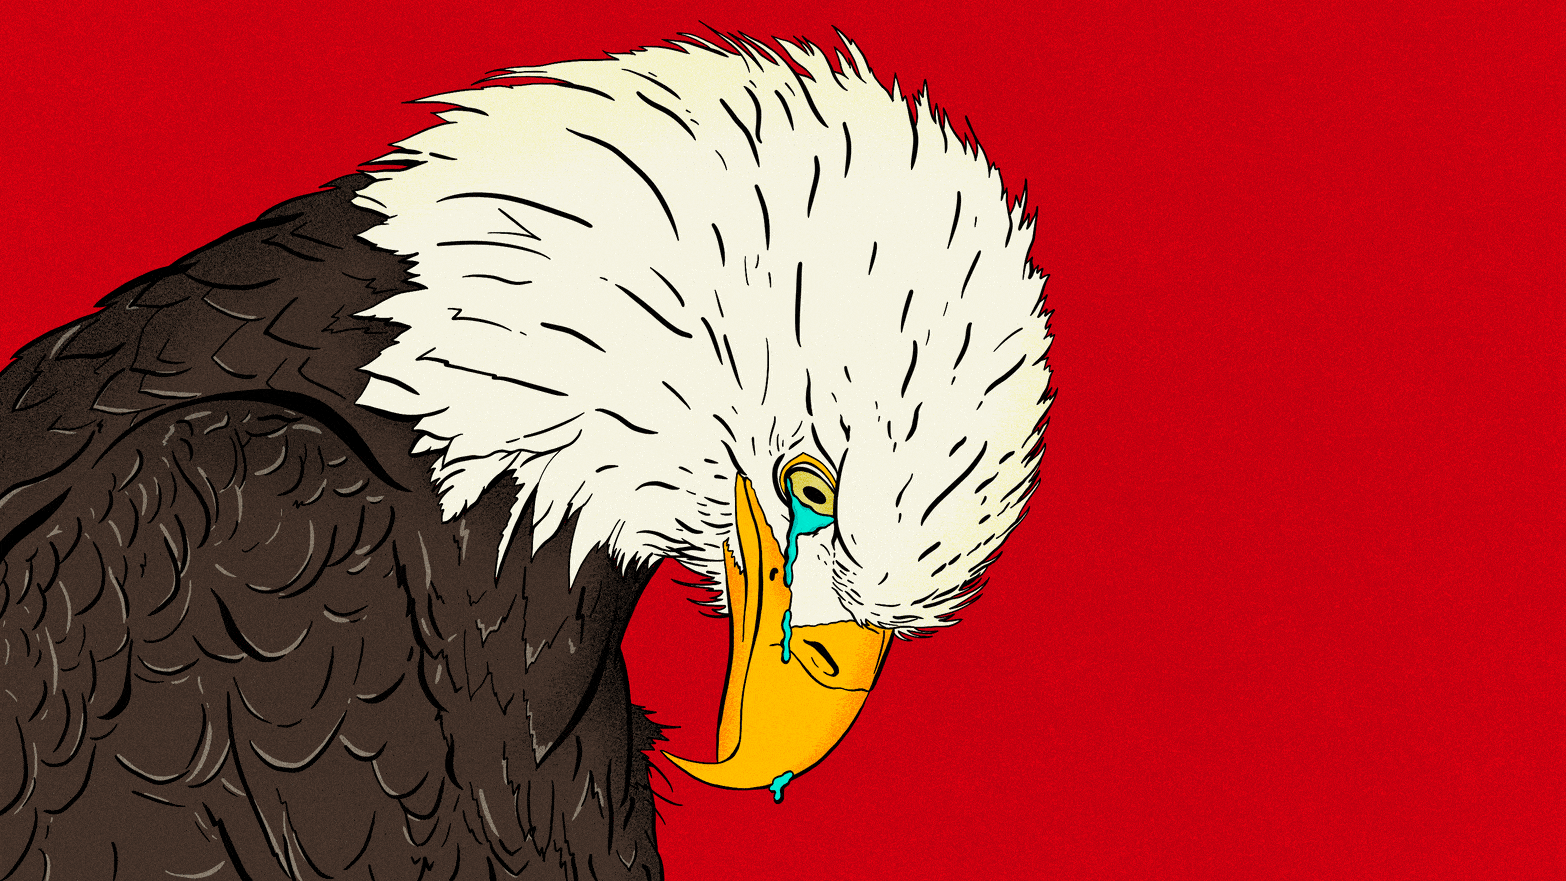 Illustrative gif of a sad bald eagle crying on a red background